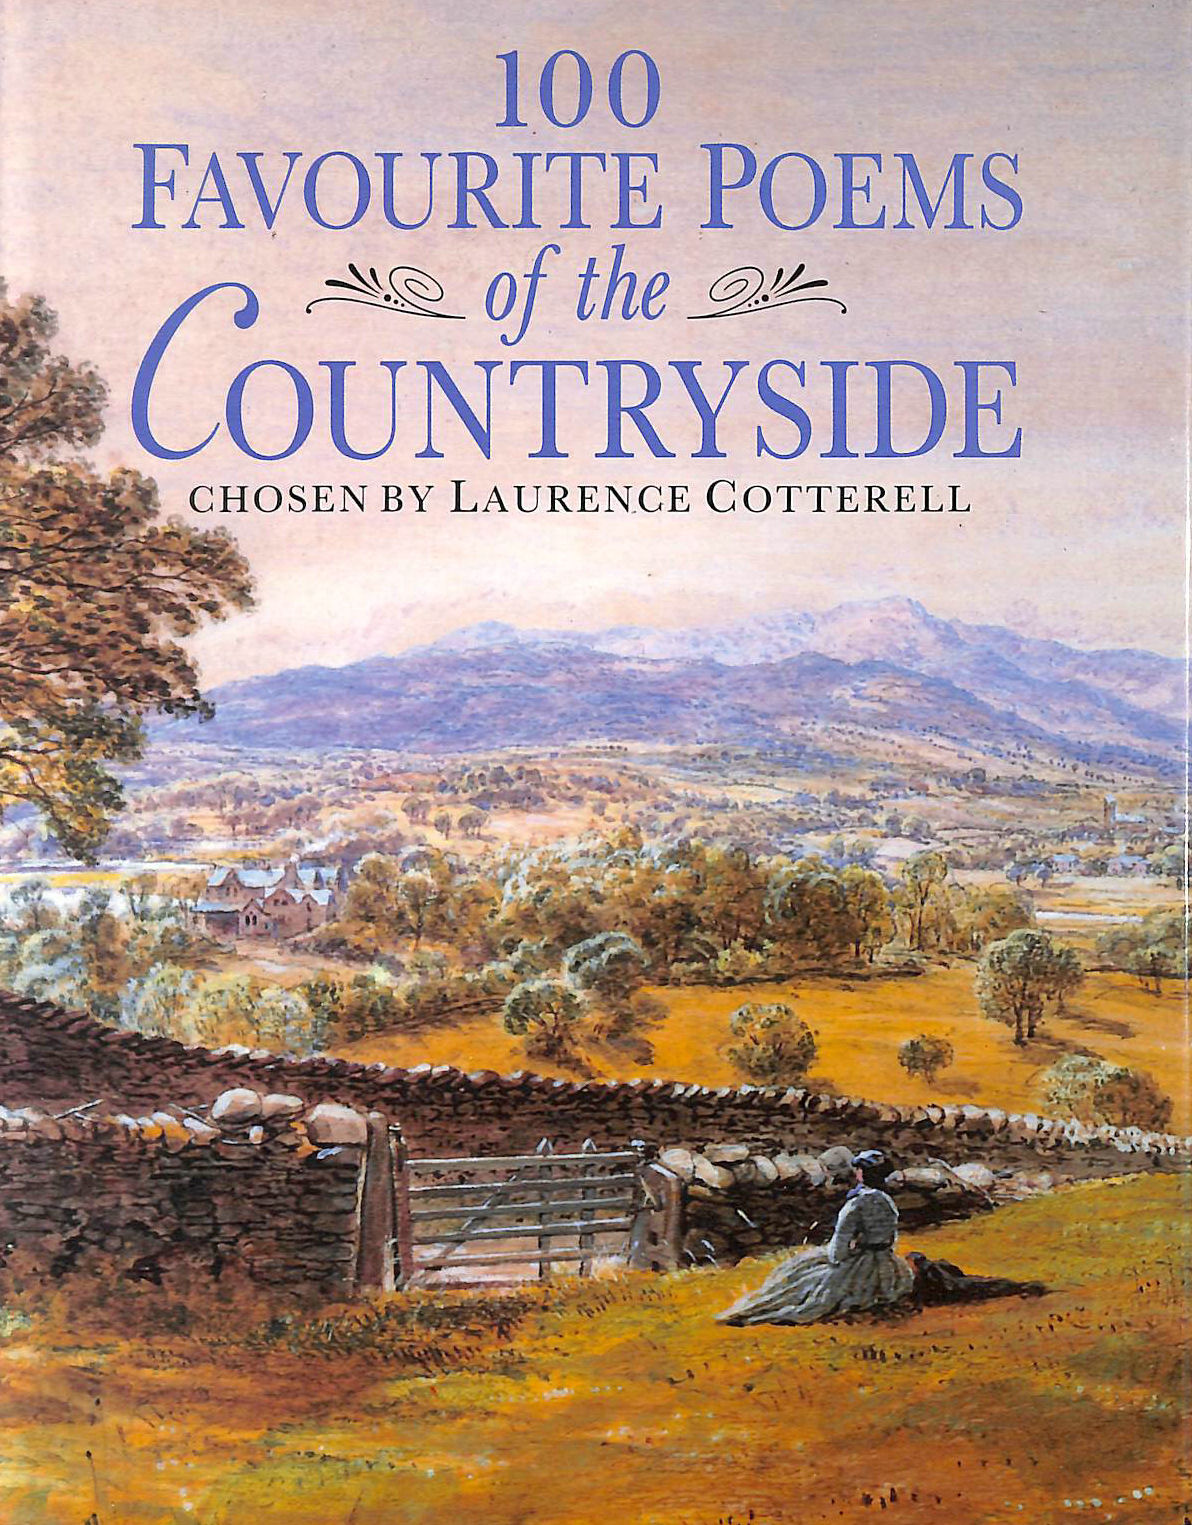 COTTERELL, LAURENCE [EDITOR] - 100 Favourite Poems of the Countryside